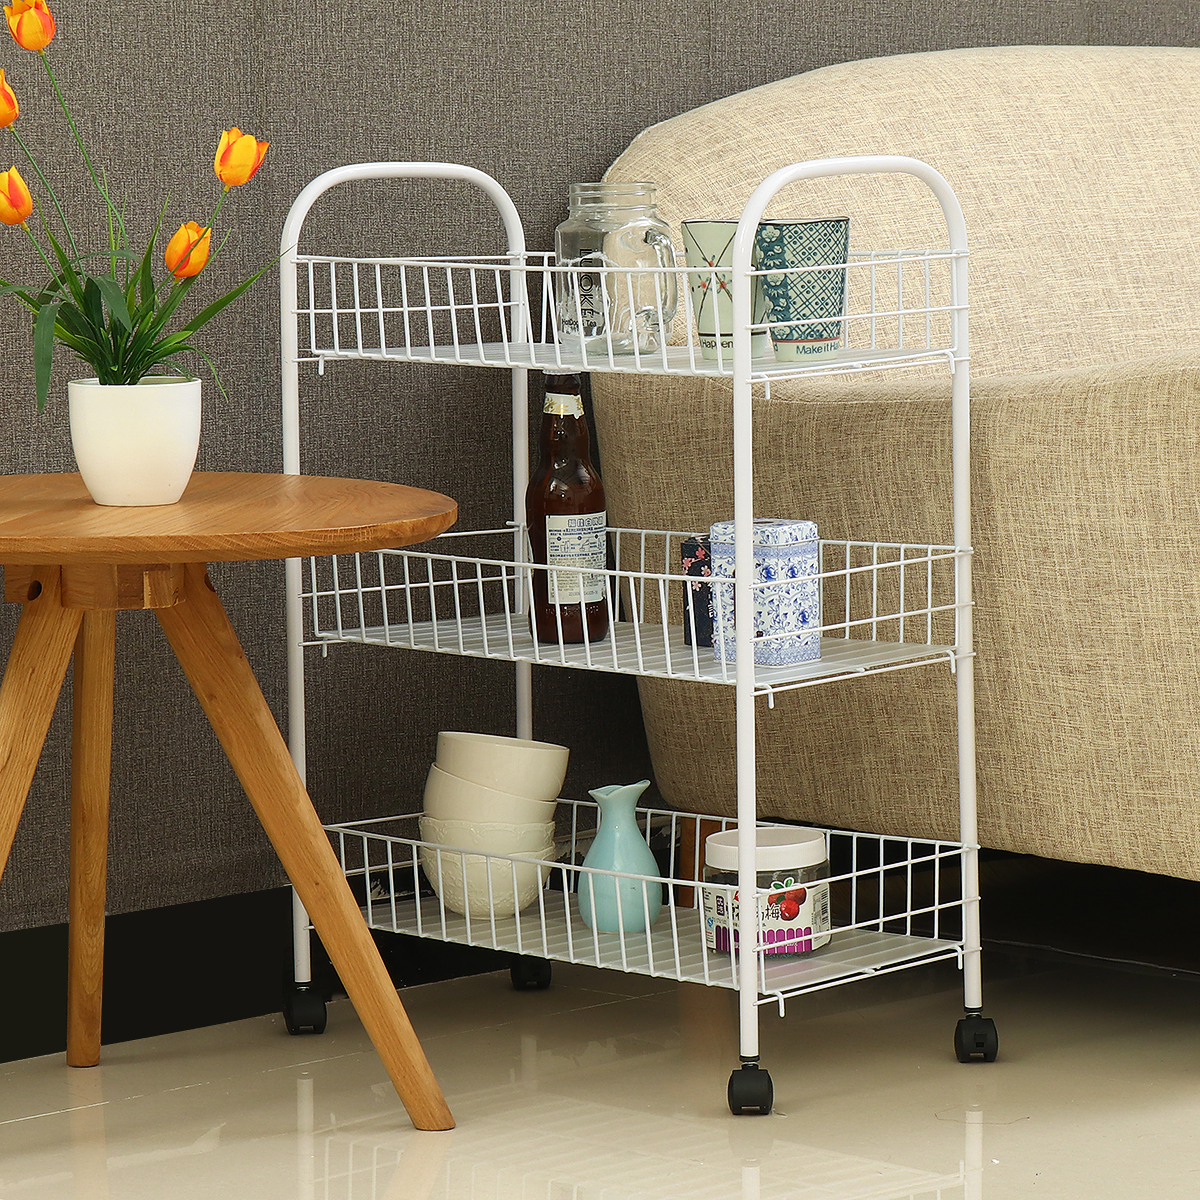 34-Layers-Multi-function-Shelf-Portable-Cart-Wheels-for-Household-Kitchen-Items-Storage-1671773-5